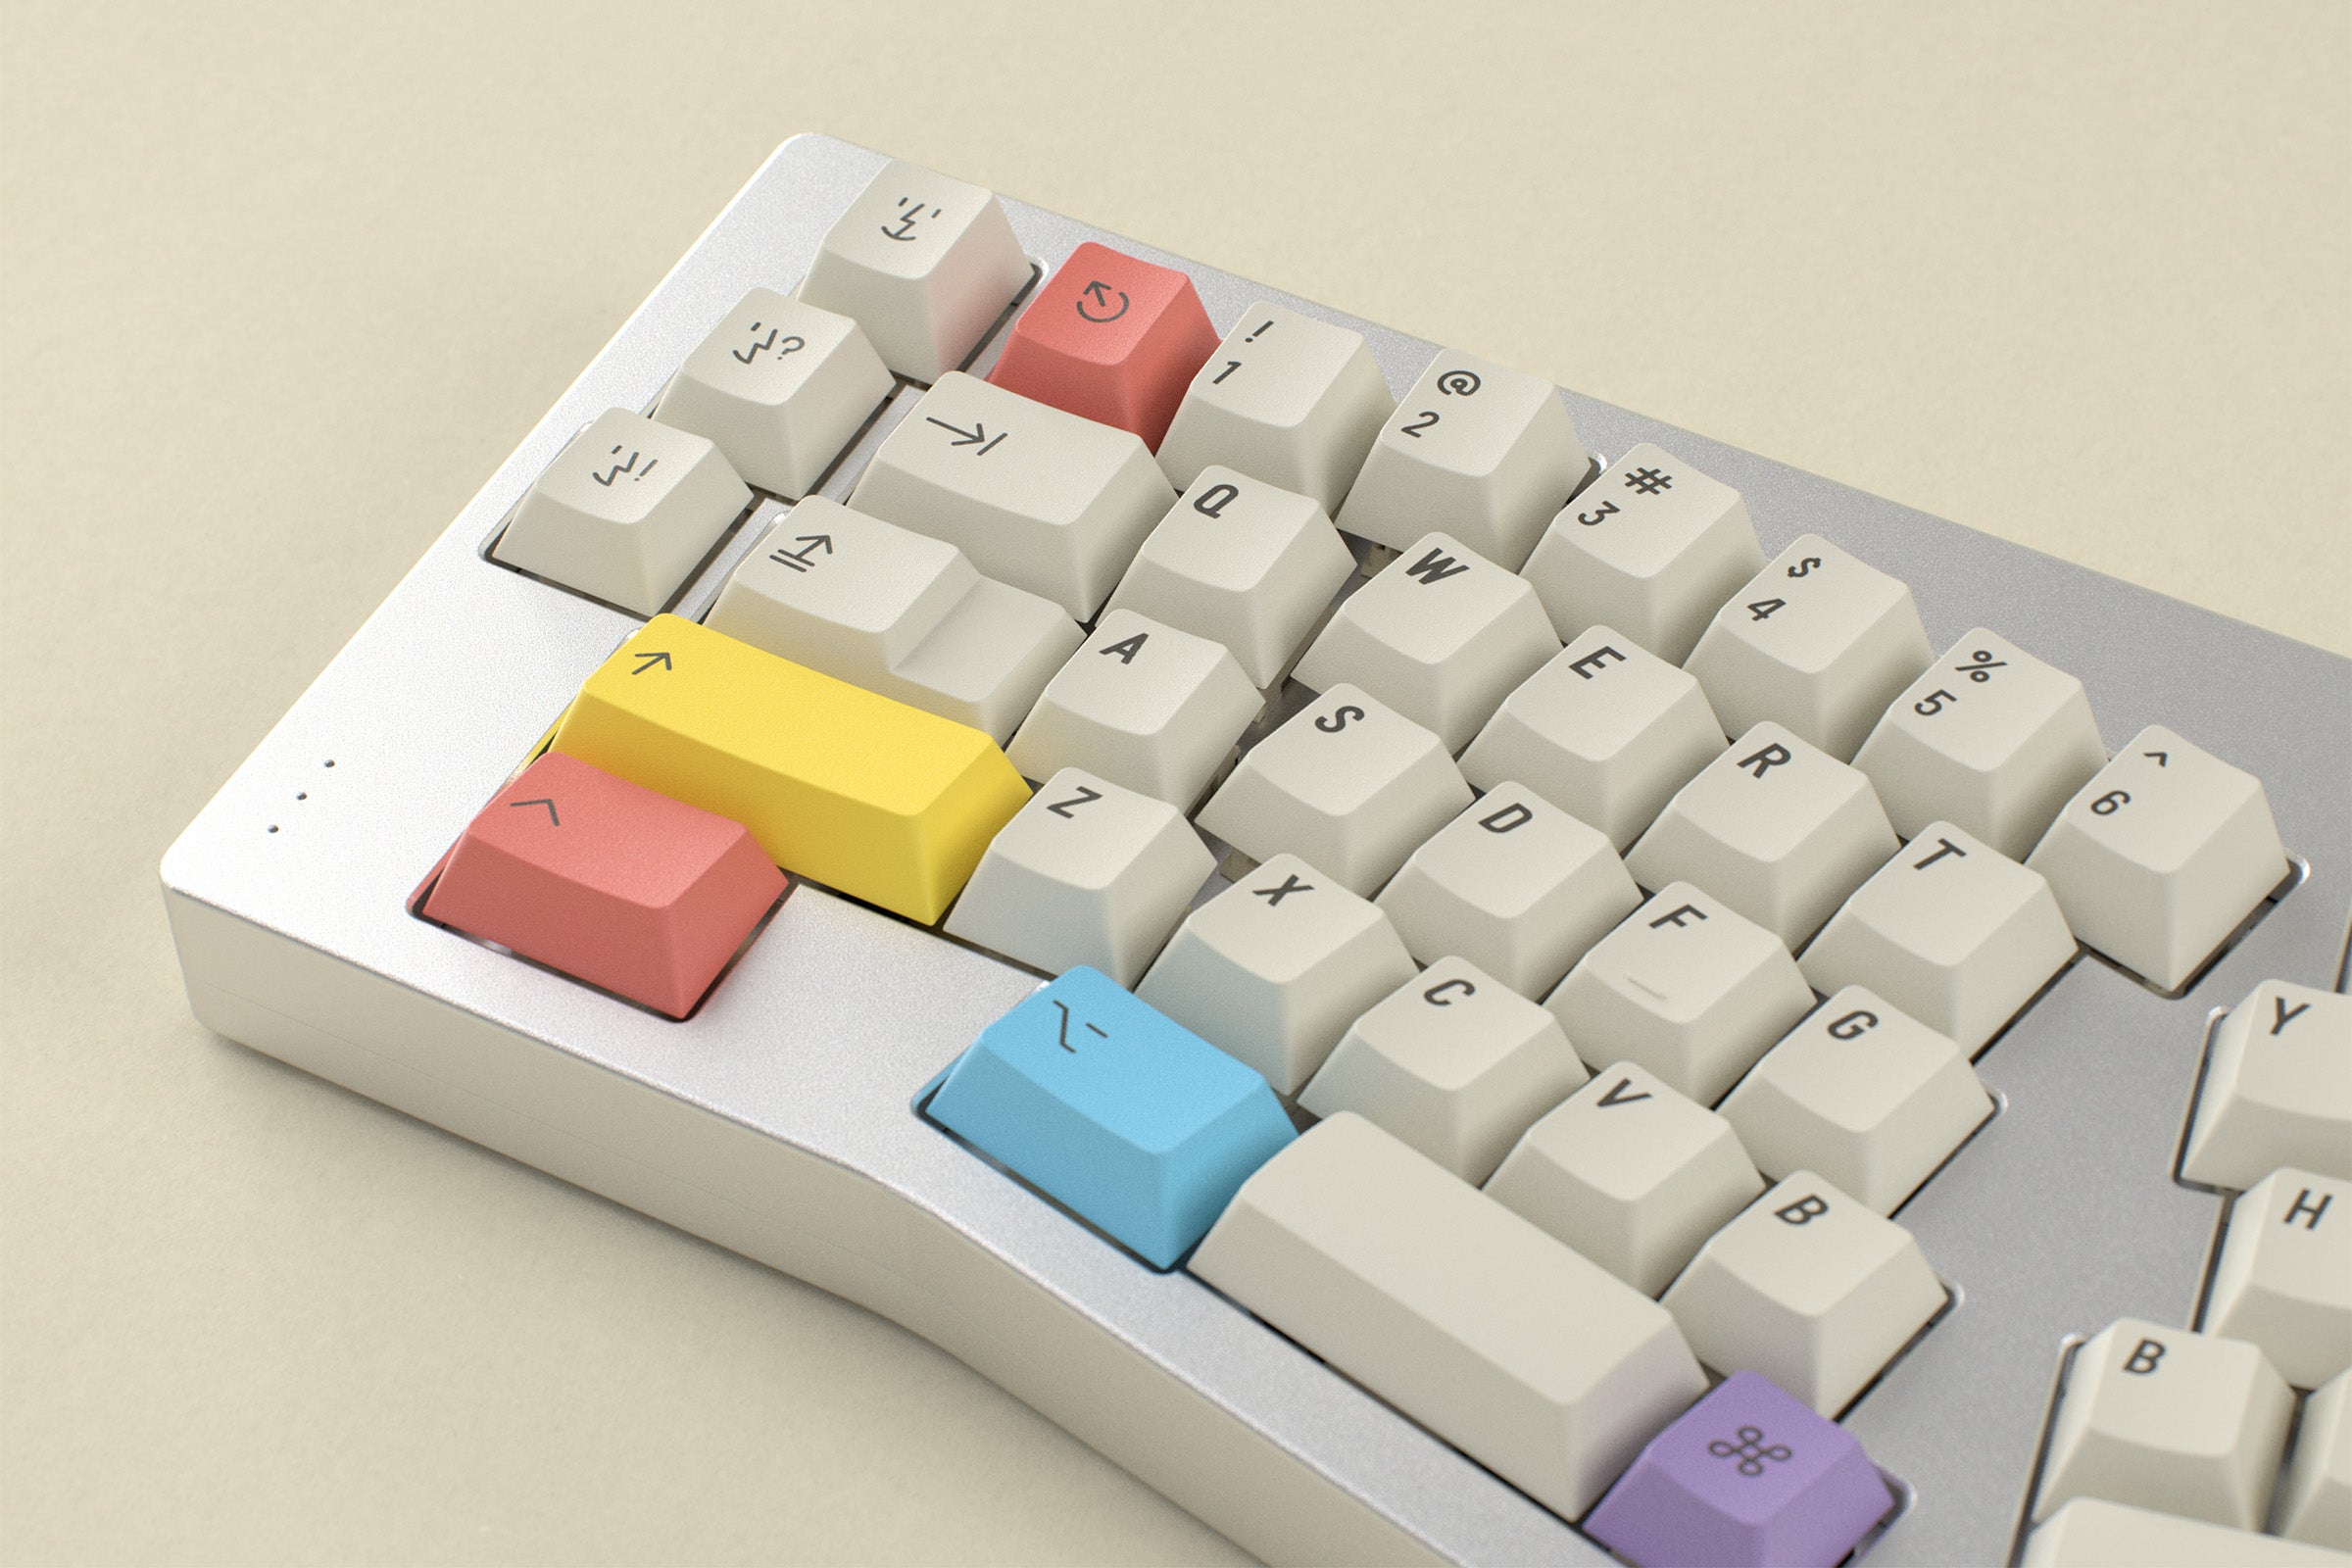 GMK CYL Extended 2048